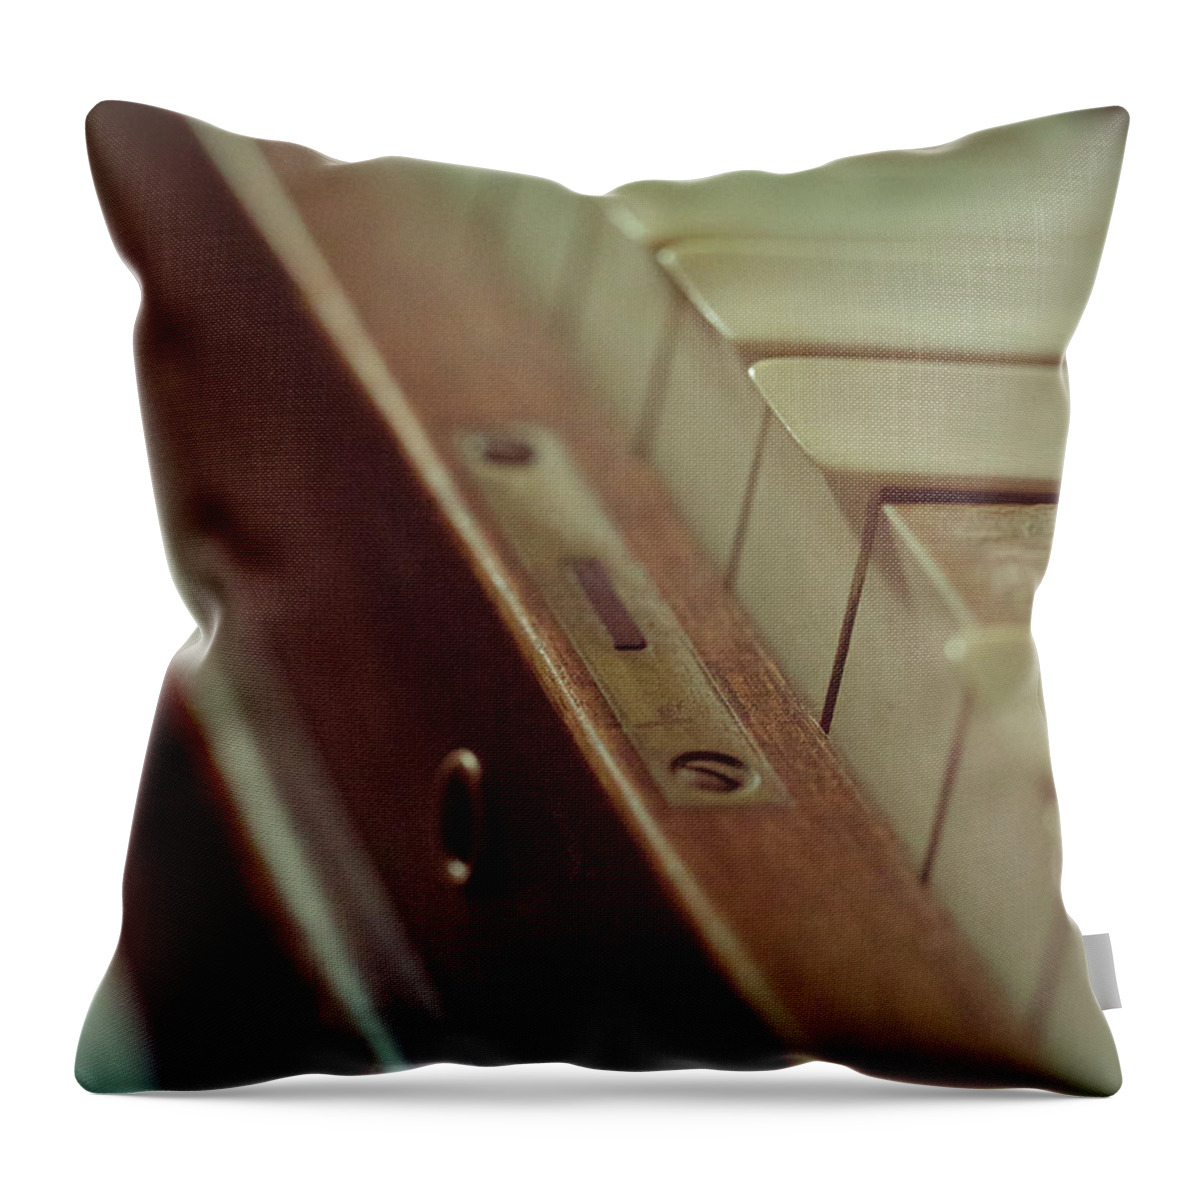 Tranquility Throw Pillow featuring the photograph Grandmas Piano by Thousand Word Images By Dustin Abbott